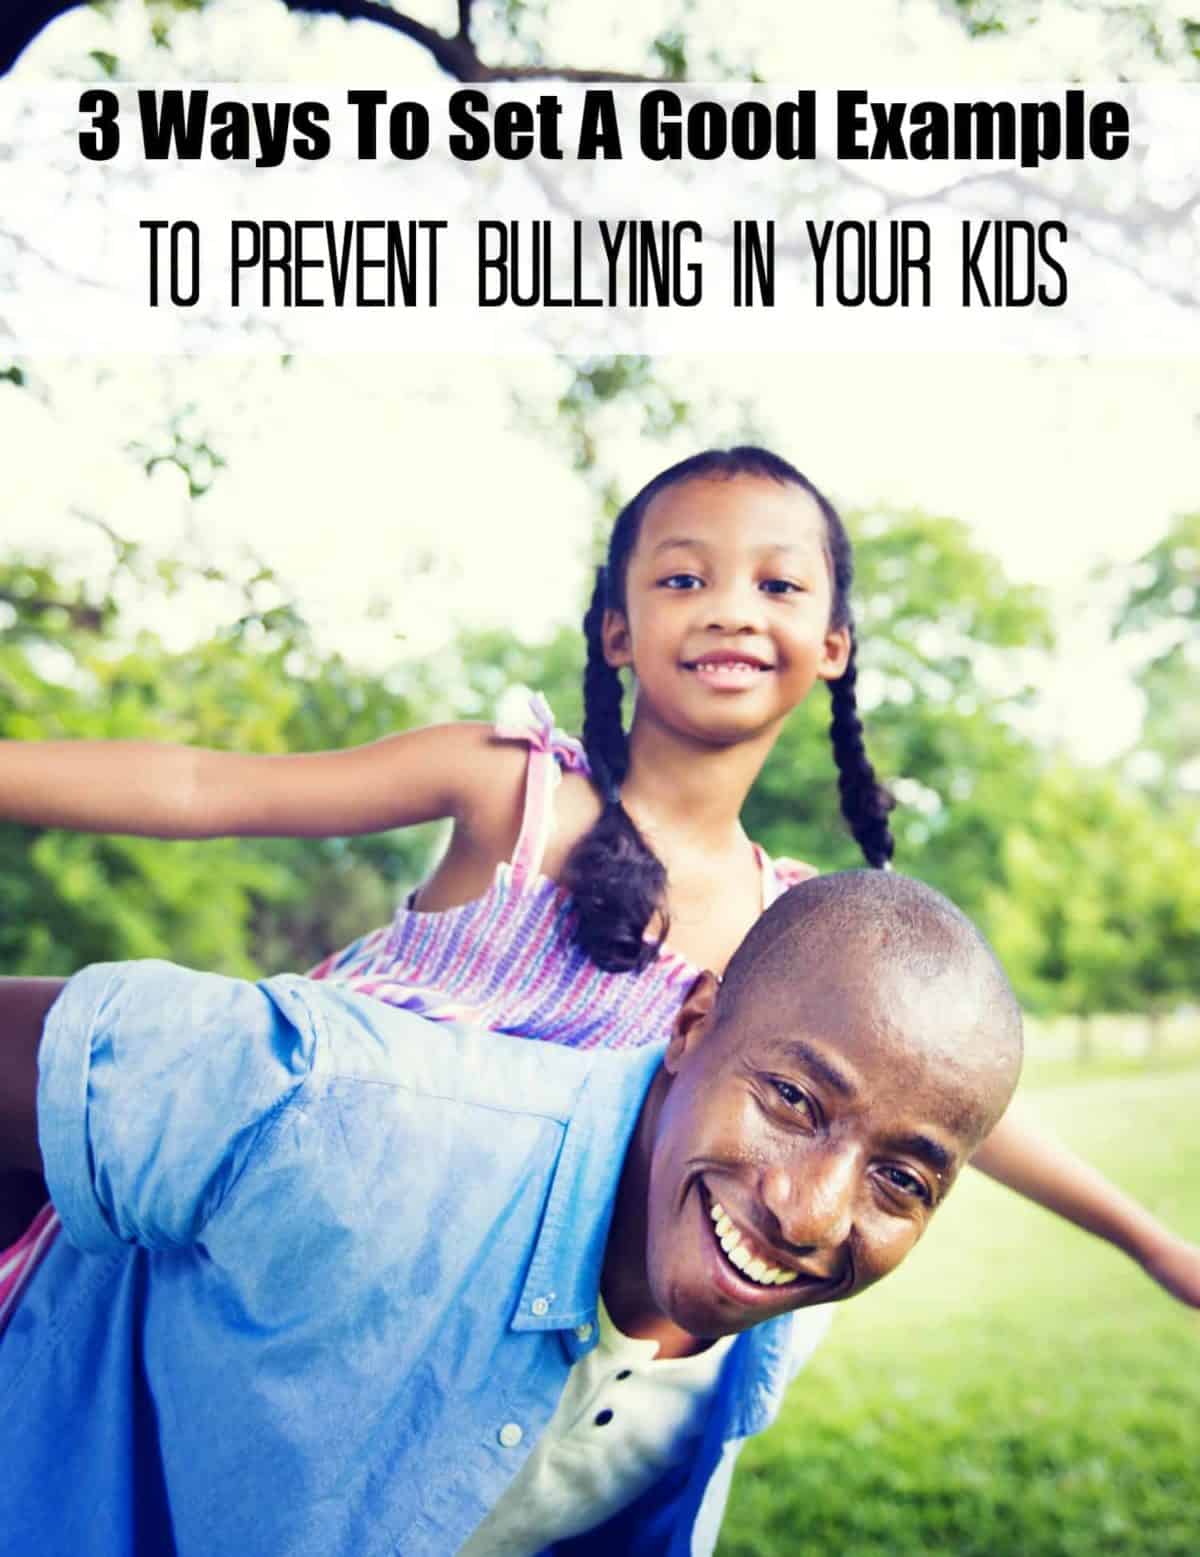 The best way to prevent bullying in your kids is to raise them to be kind & loving children. How do you do this? Follow these 3 ways to set a good example!